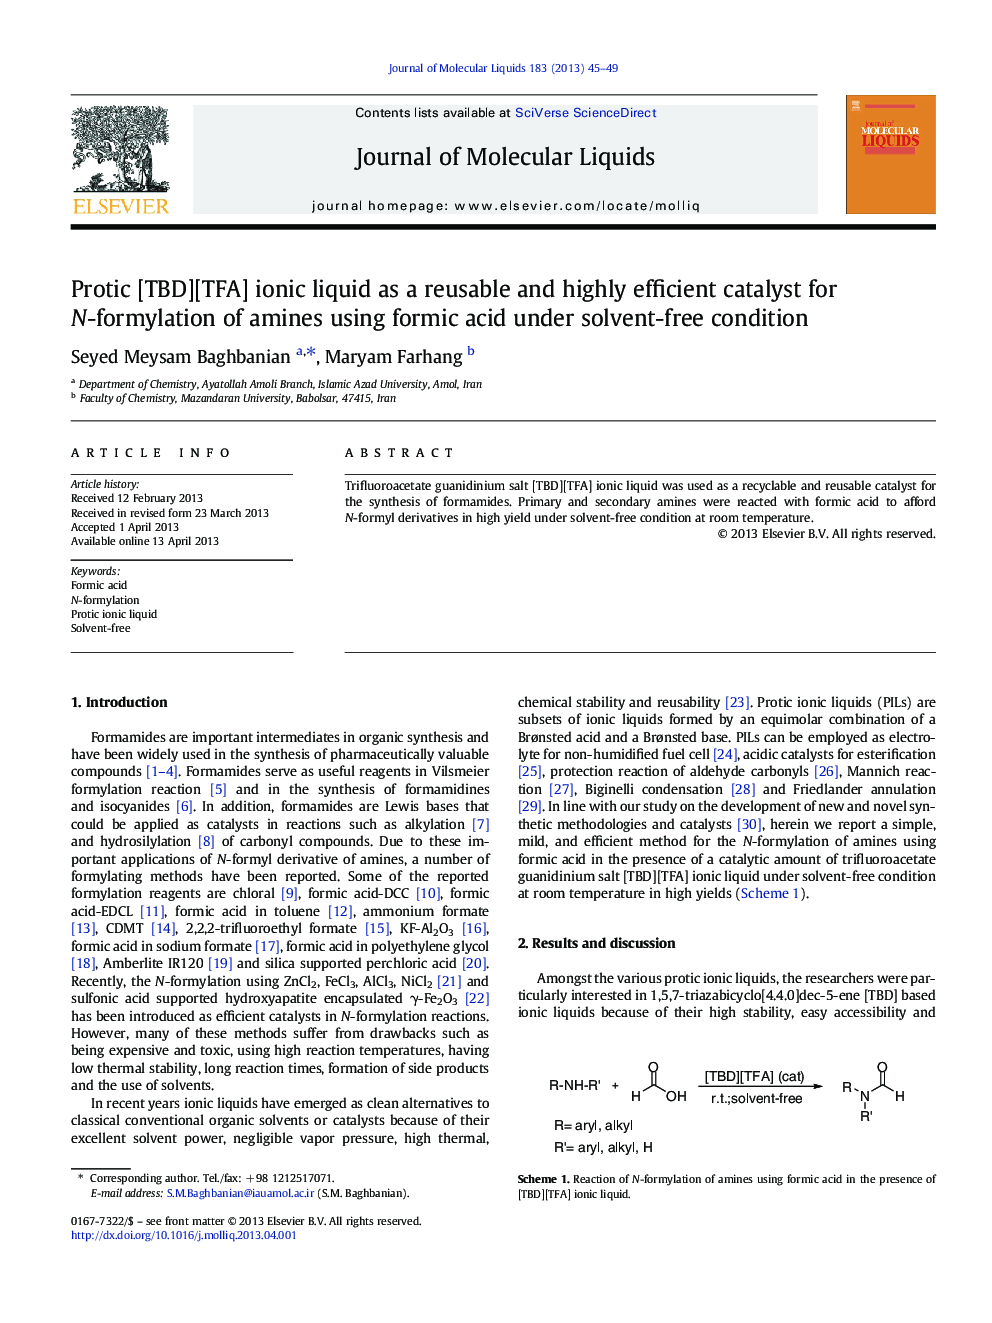 Protic [TBD][TFA] ionic liquid as a reusable and highly efficient catalyst for N-formylation of amines using formic acid under solvent-free condition